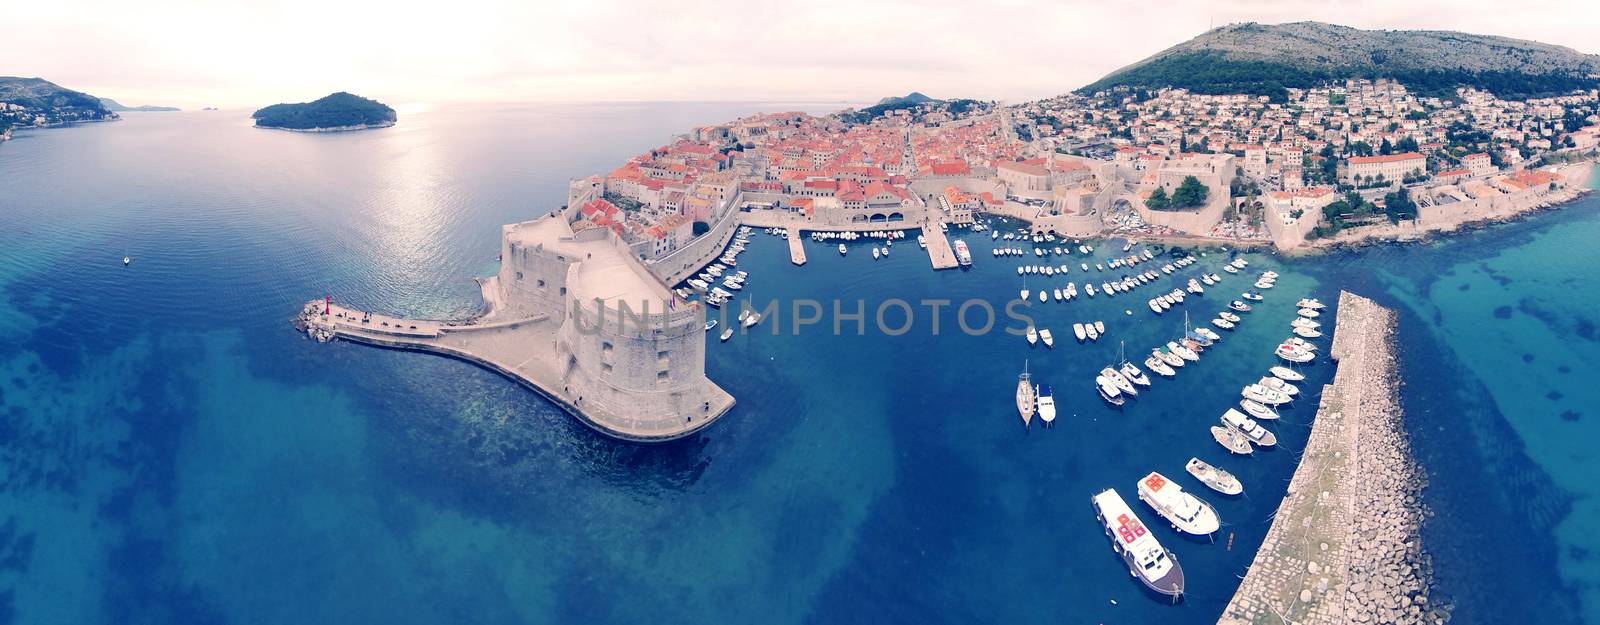 Areal panoramic view on Dubrovnik, Croatia. One of the most prominent travel destinations on Adriatic sea, located on Dalmatian coastline.